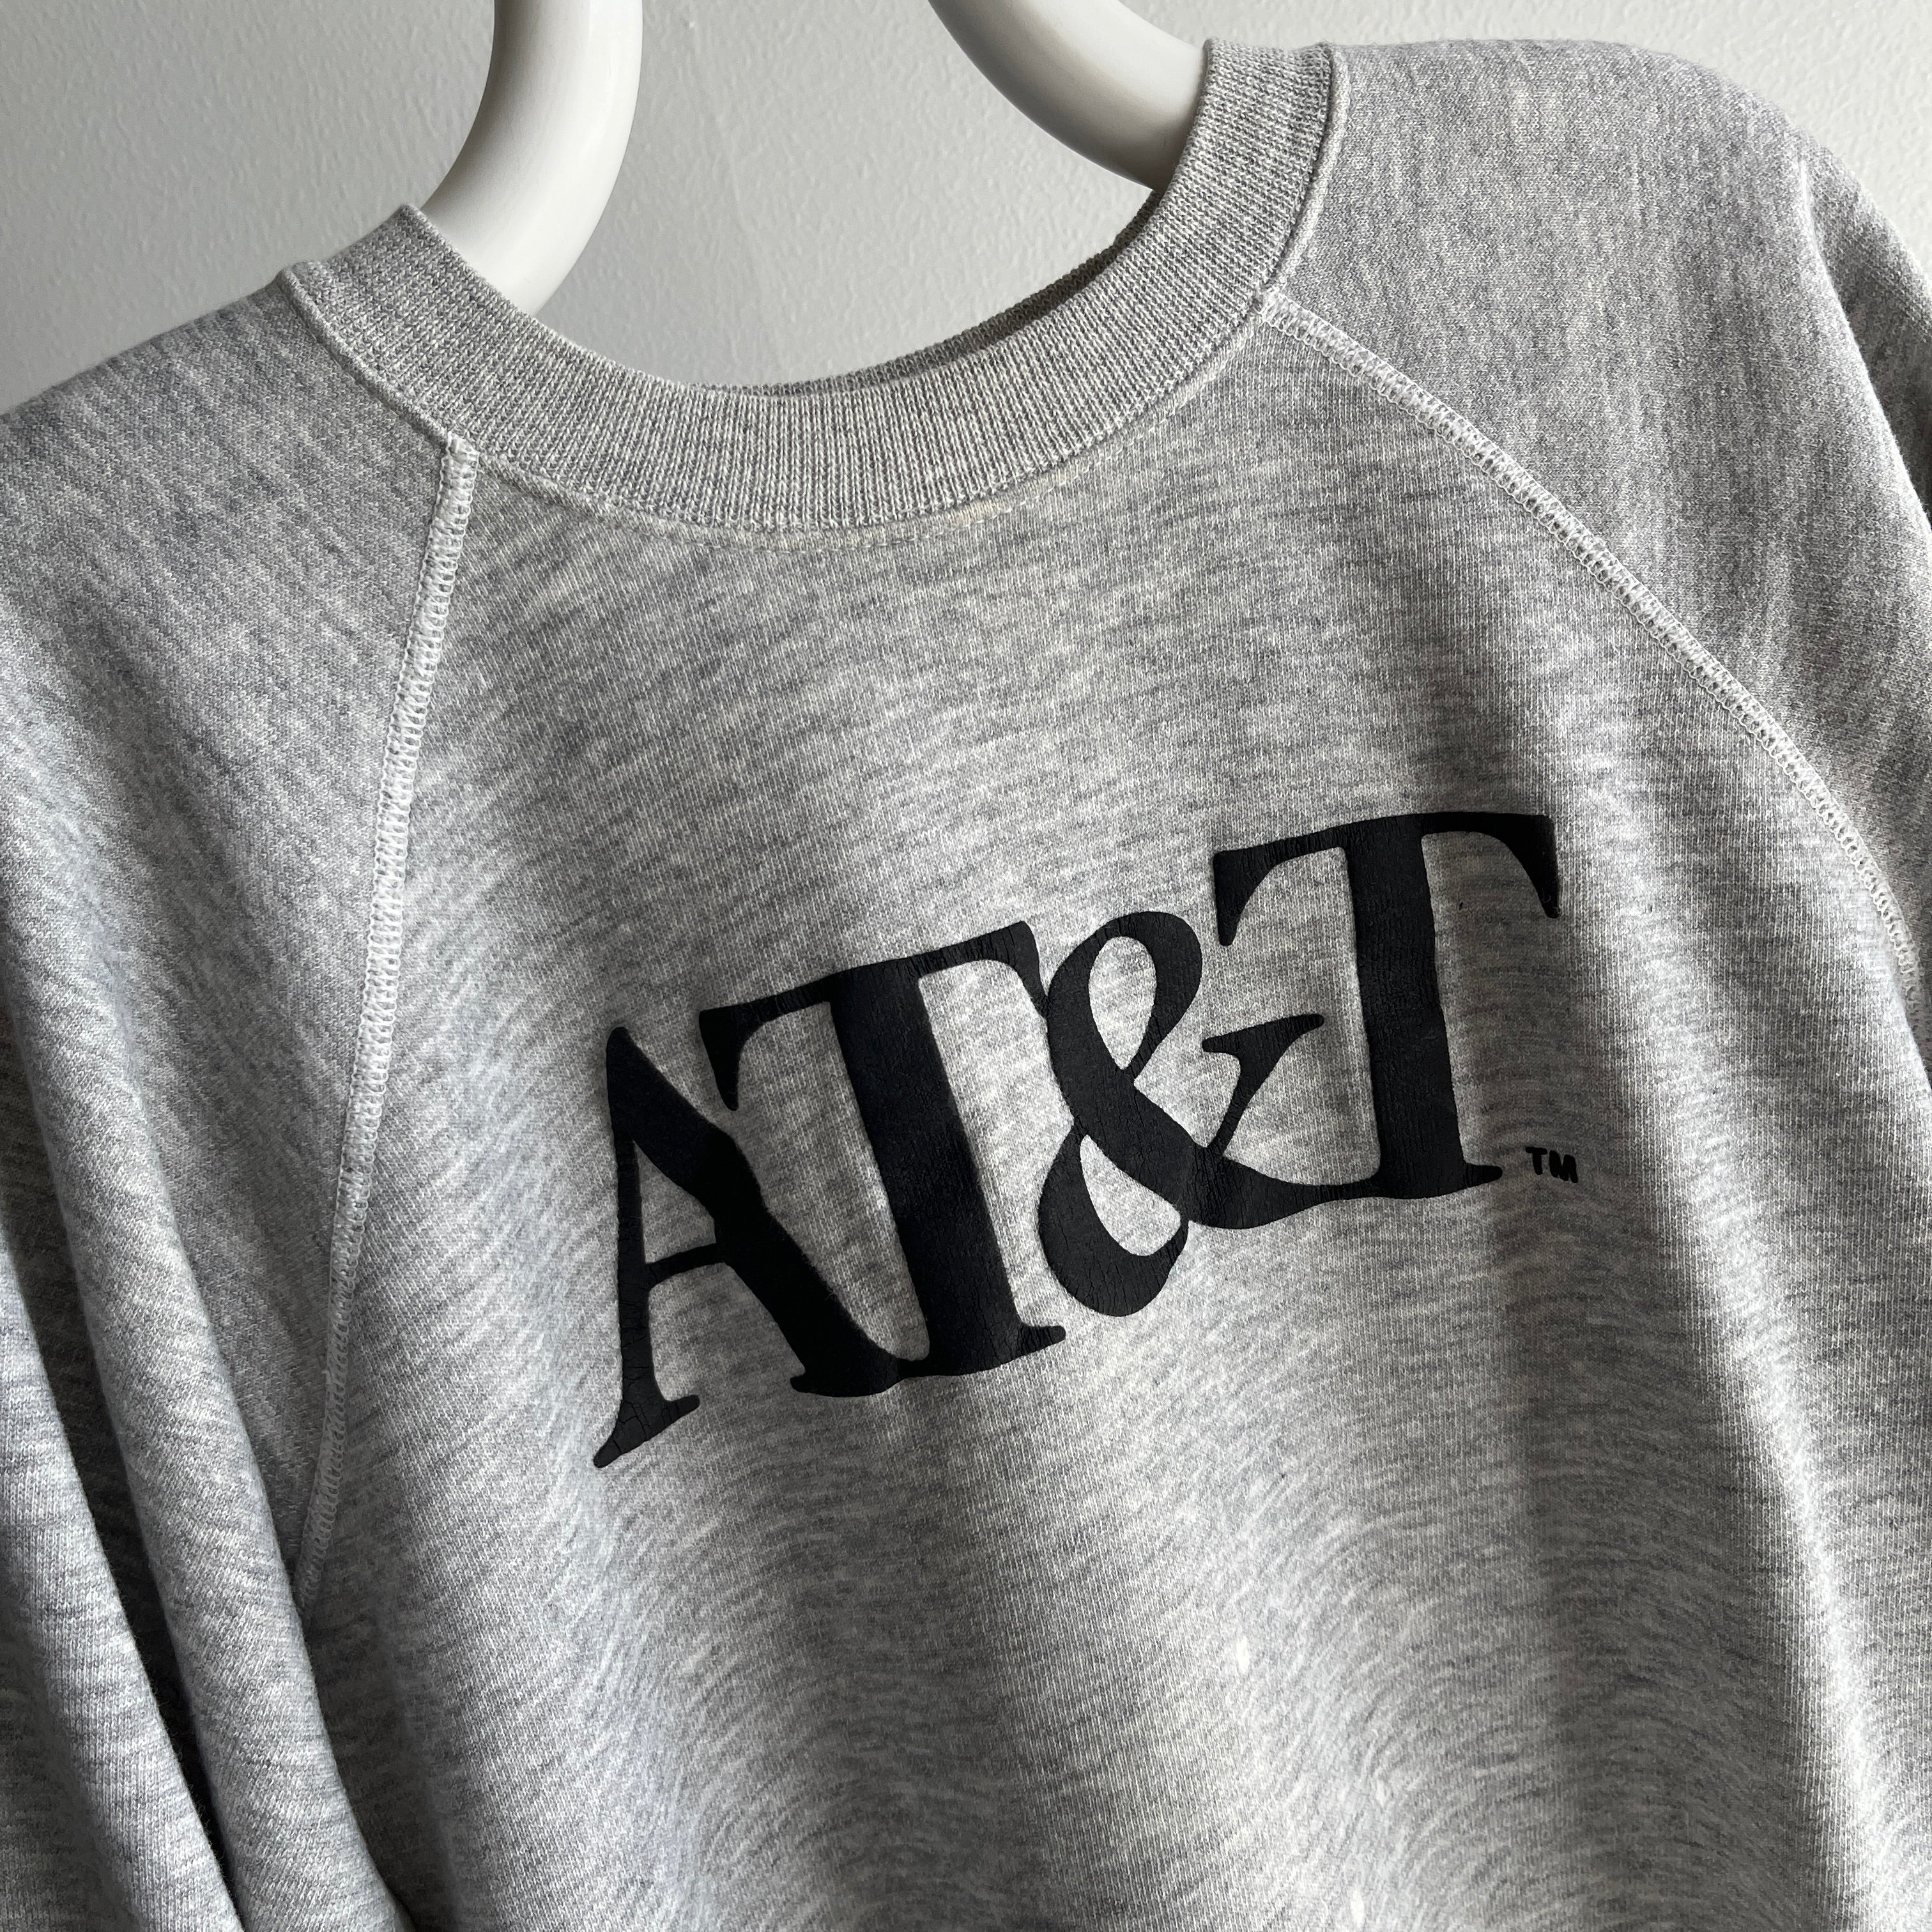 1980s AT&T Sweatshirt with Bleach Staining